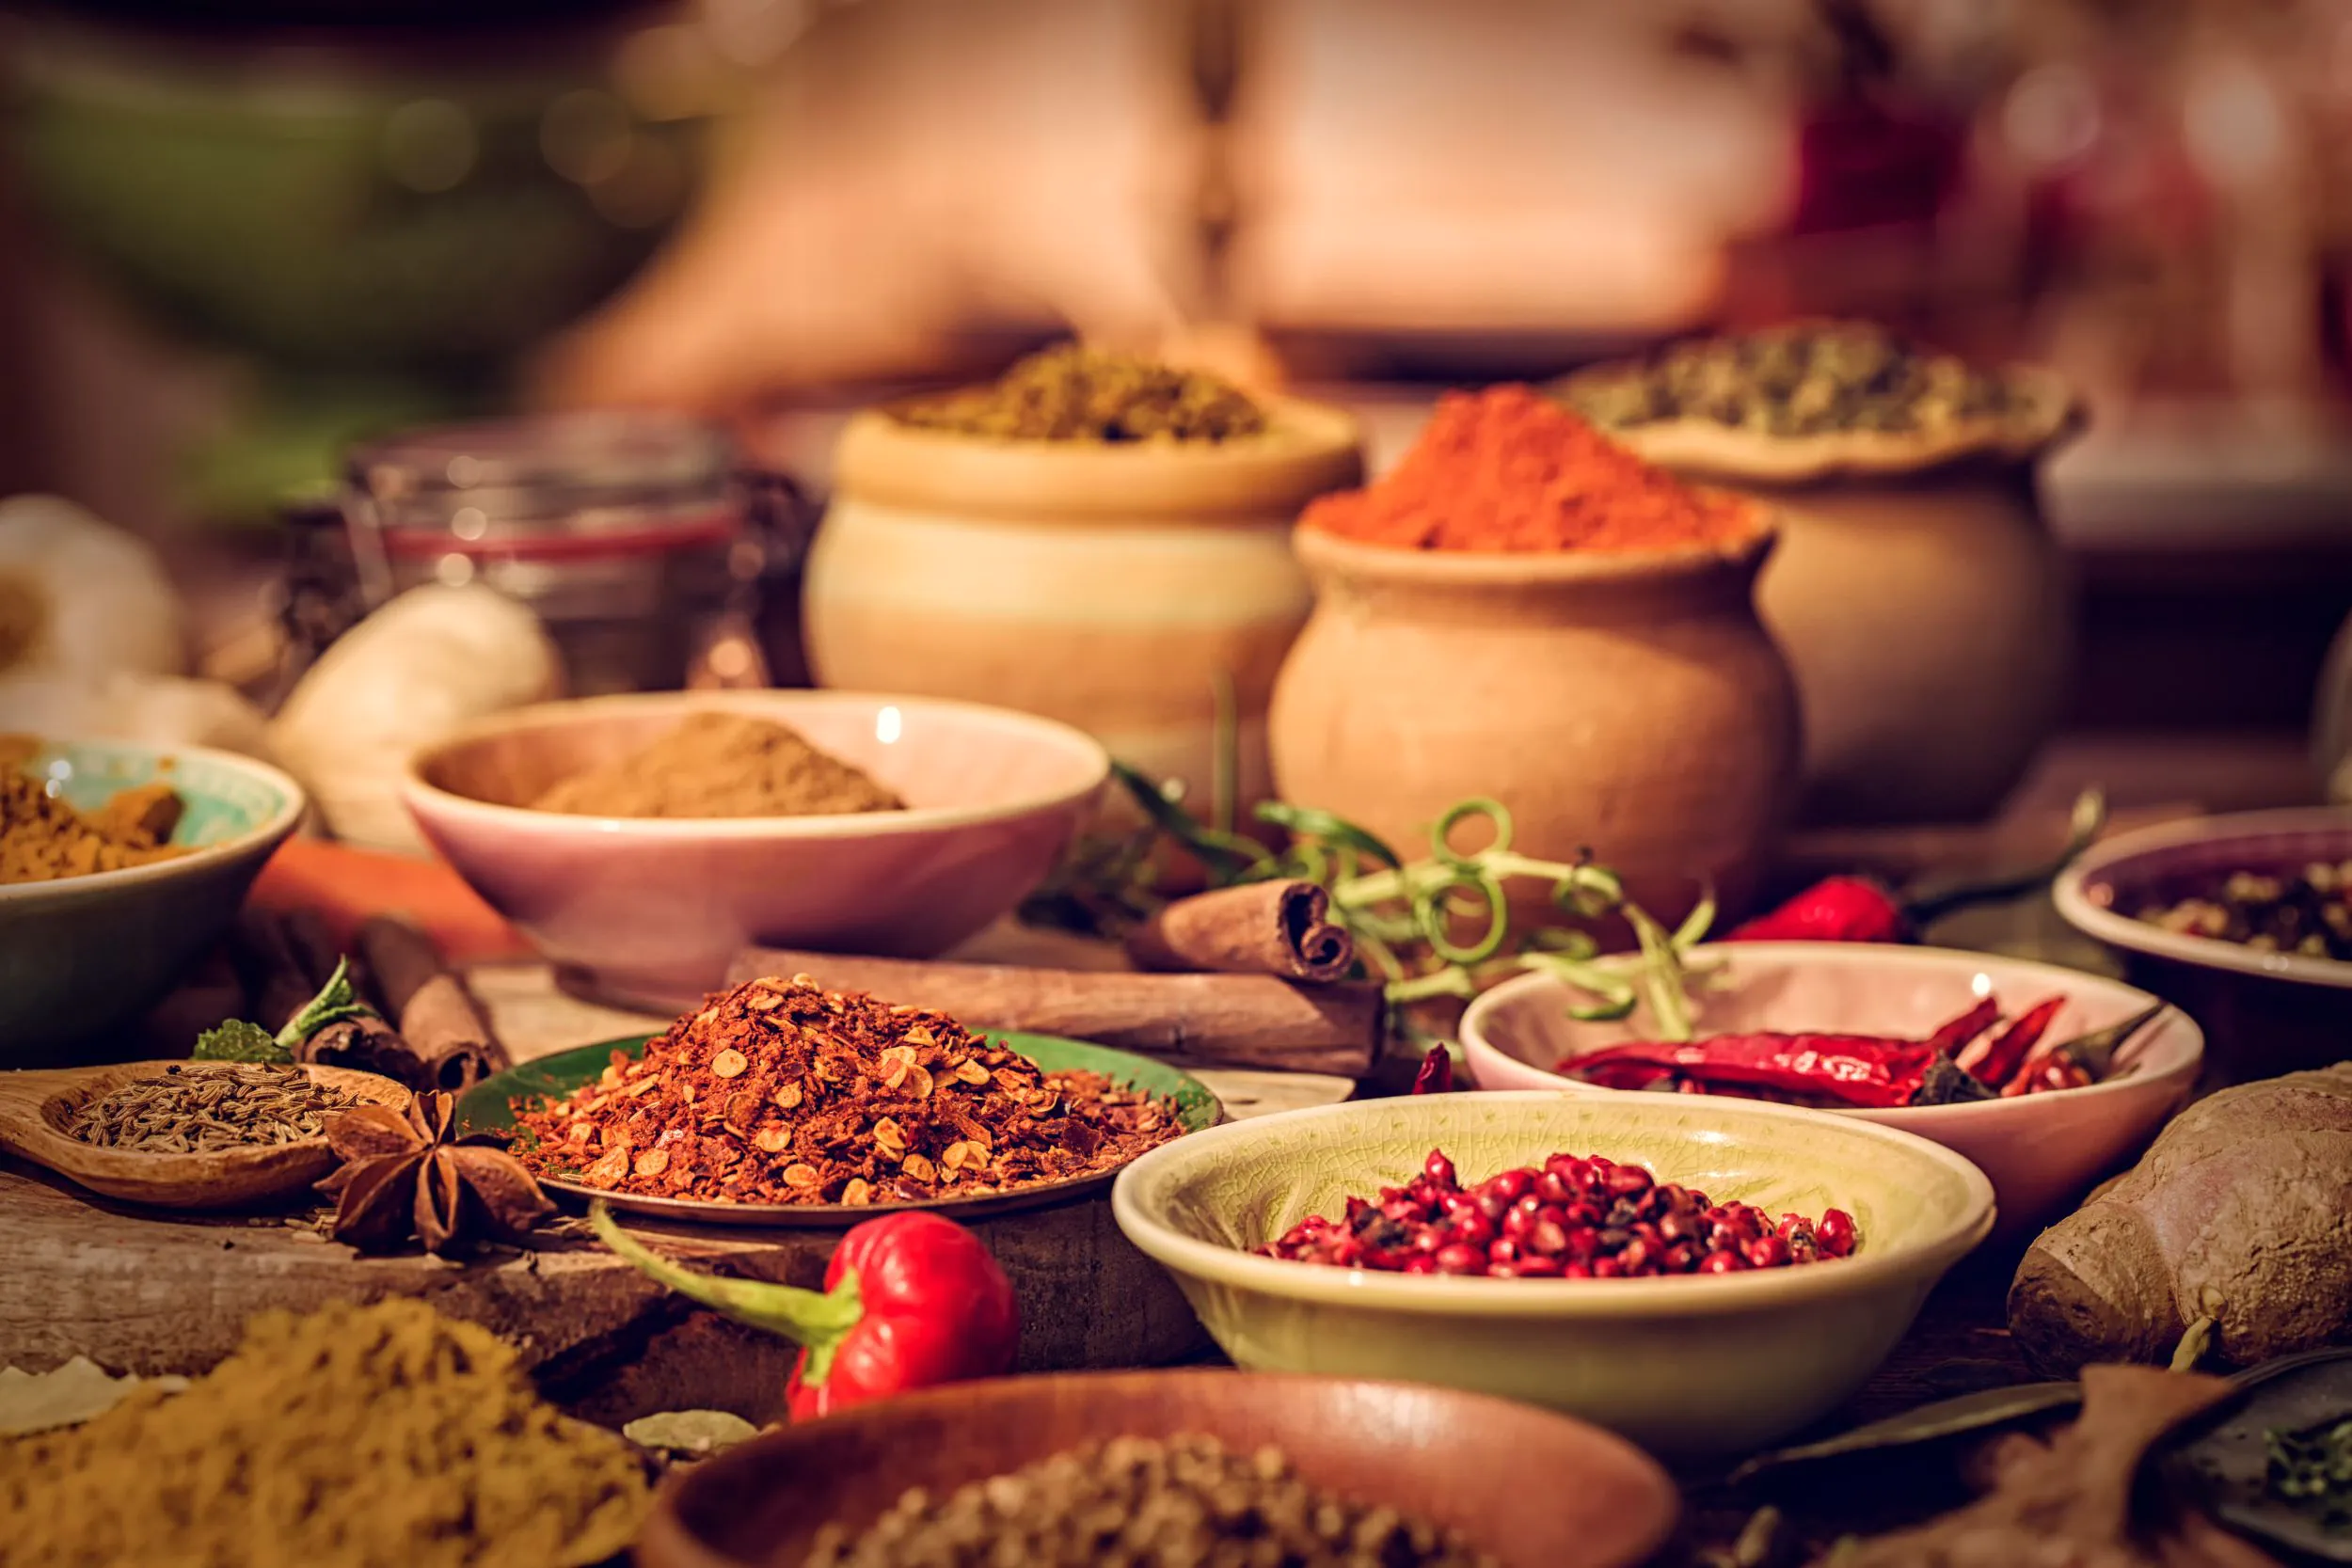 Seasonings and Spices Industry: Overview and Future Outlook